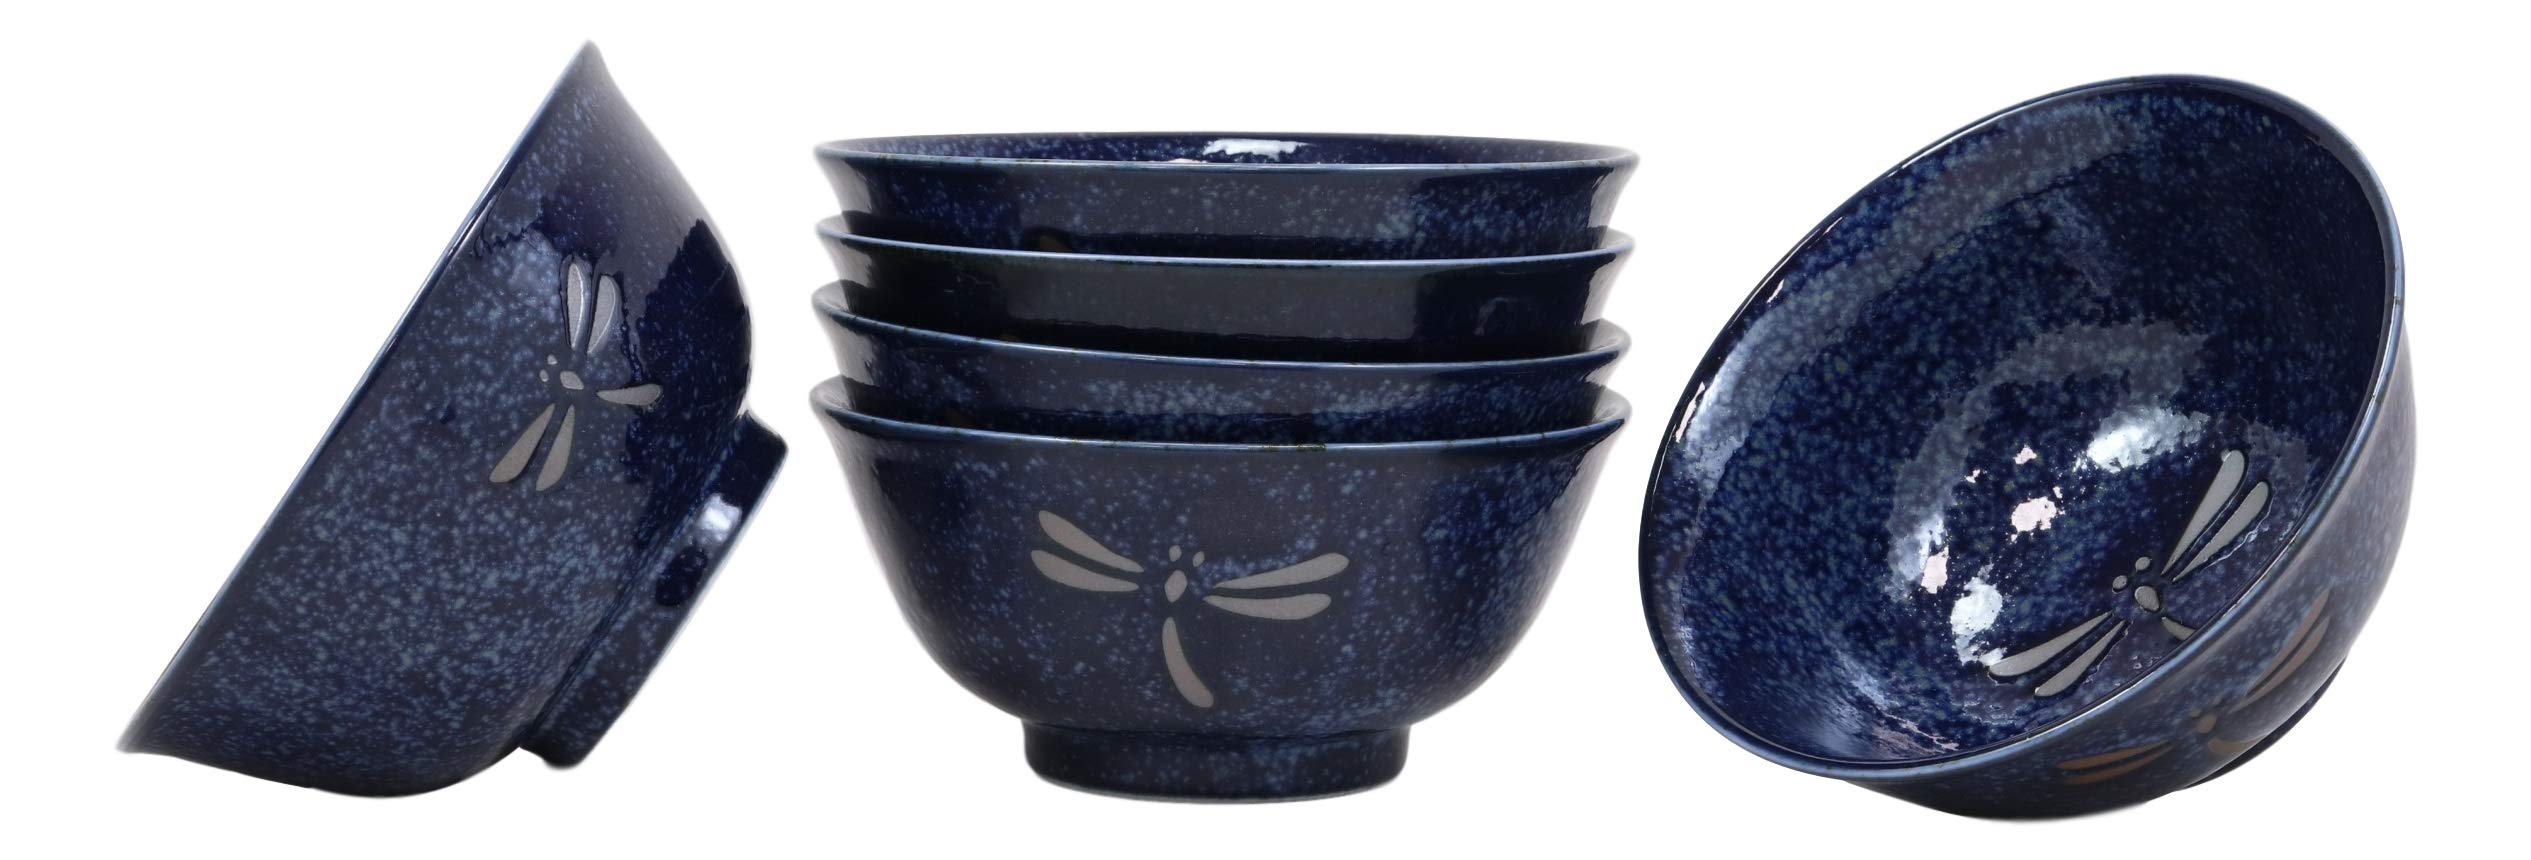 Ebros Gift Made in Japan Blue Tombo Dragonfly Design Ochawan Rice Soup Porcelain Bowls Set of 6 Home Decor Japanese Zen Fusion Asian Living Accent Housewarming Birthday Gifts Bowl Set